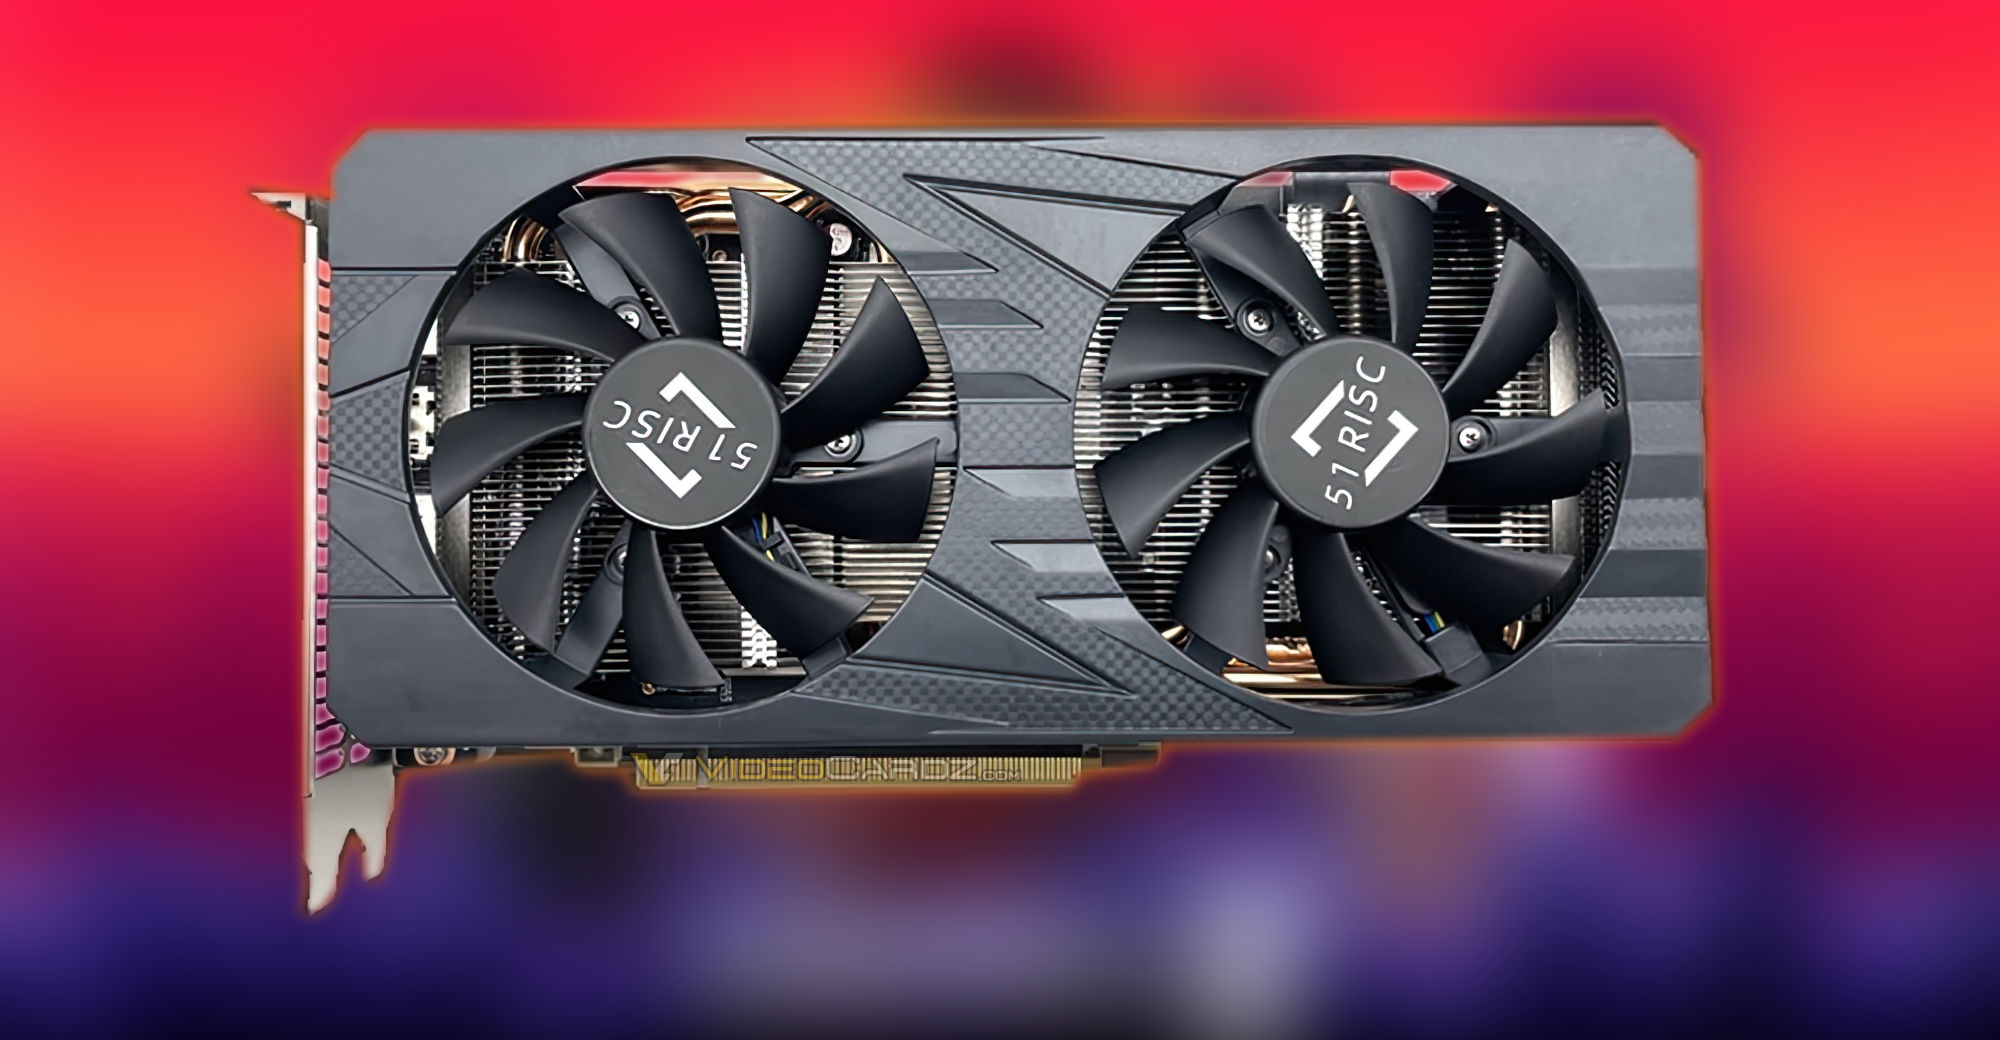 GALAX China reportedly lowers the price for select GeForce RTX GPUs, 4080  to be up to $140 cheaper - VideoCardz.com : r/nvidia